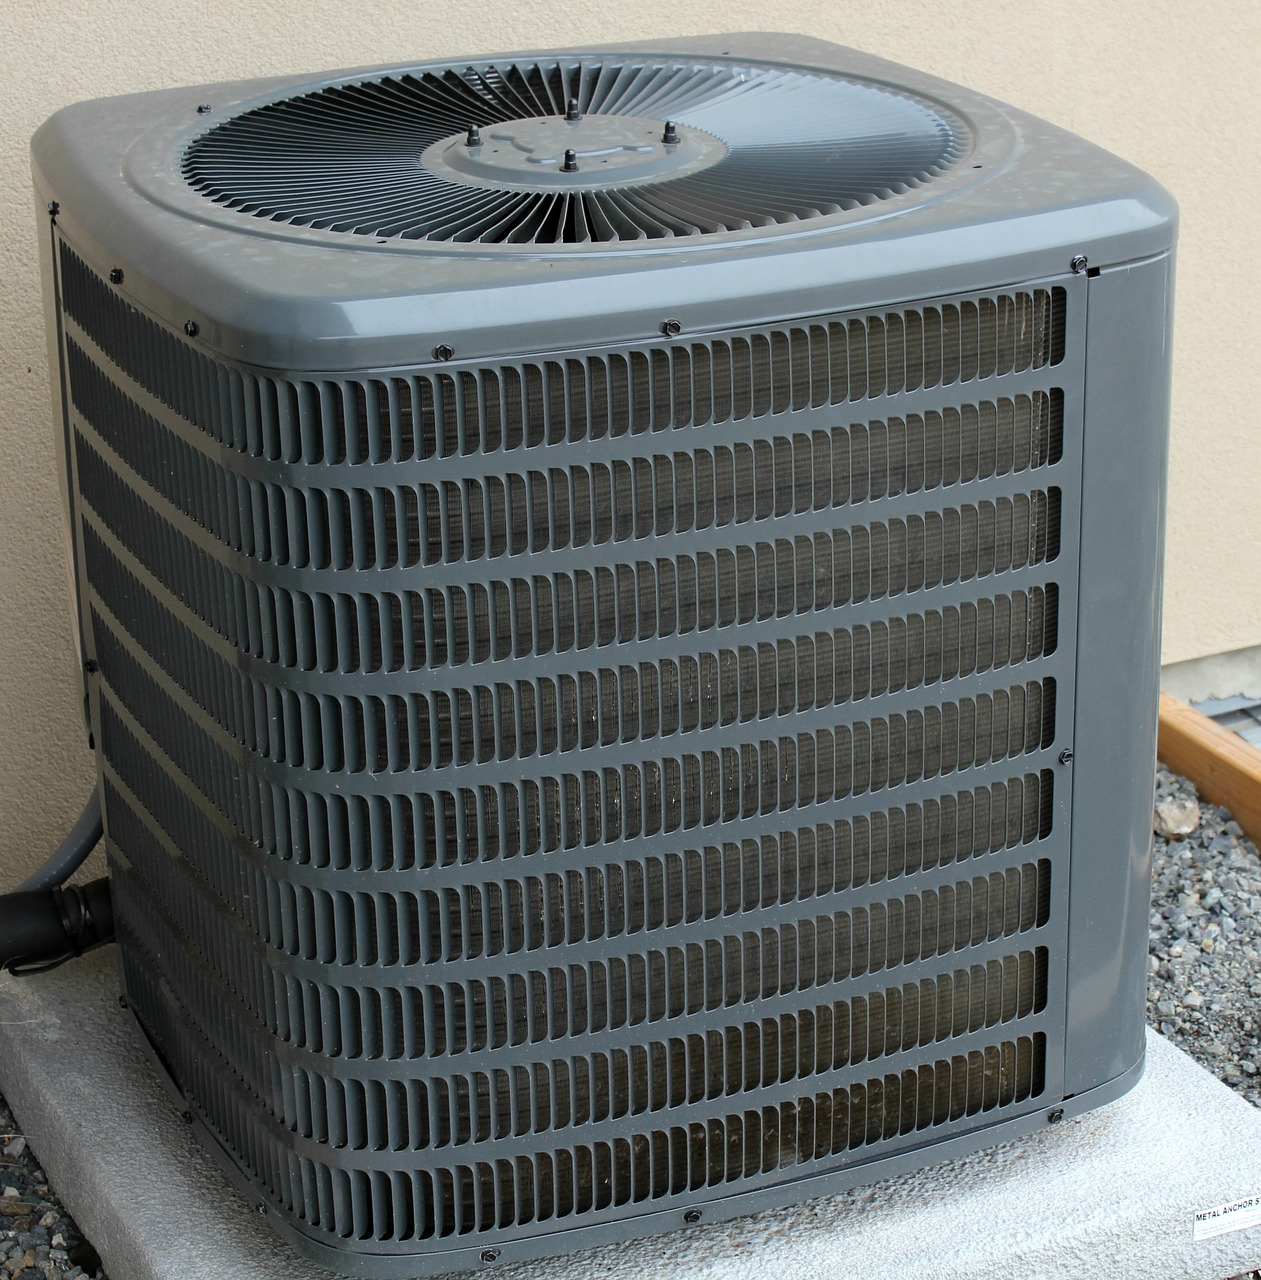 5 Things to Consider when Buying an HVAC System